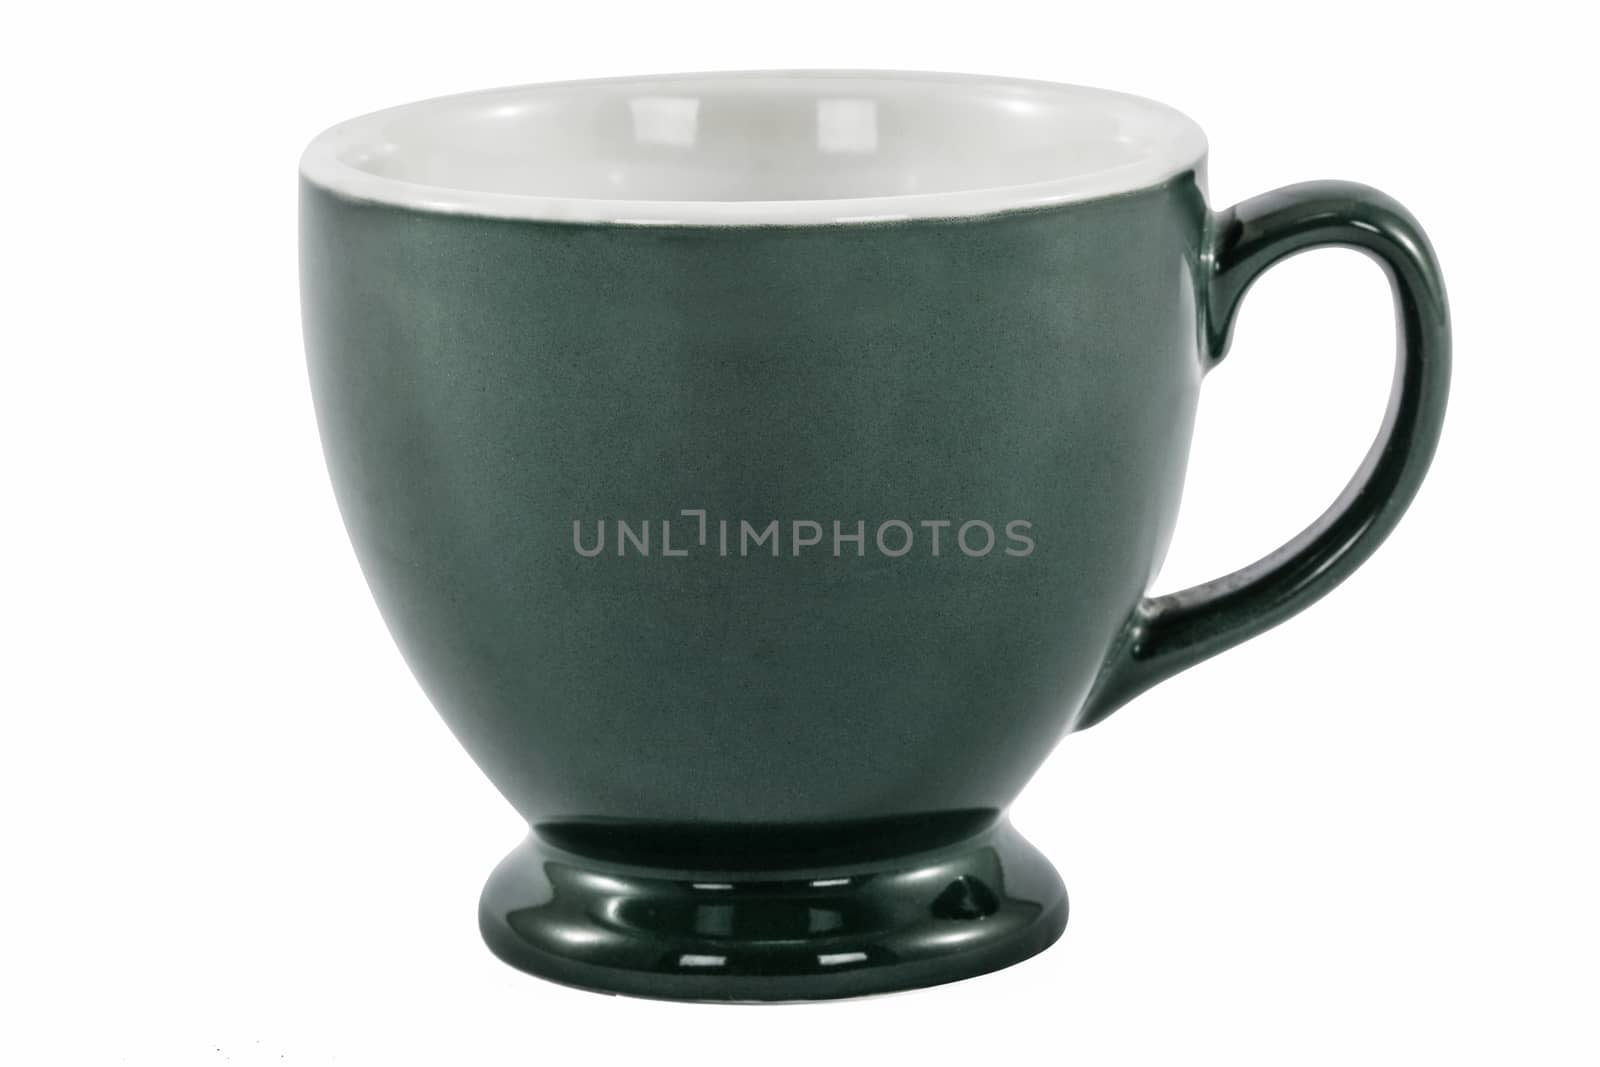 The cup for tea, isolated on white, with clipping path